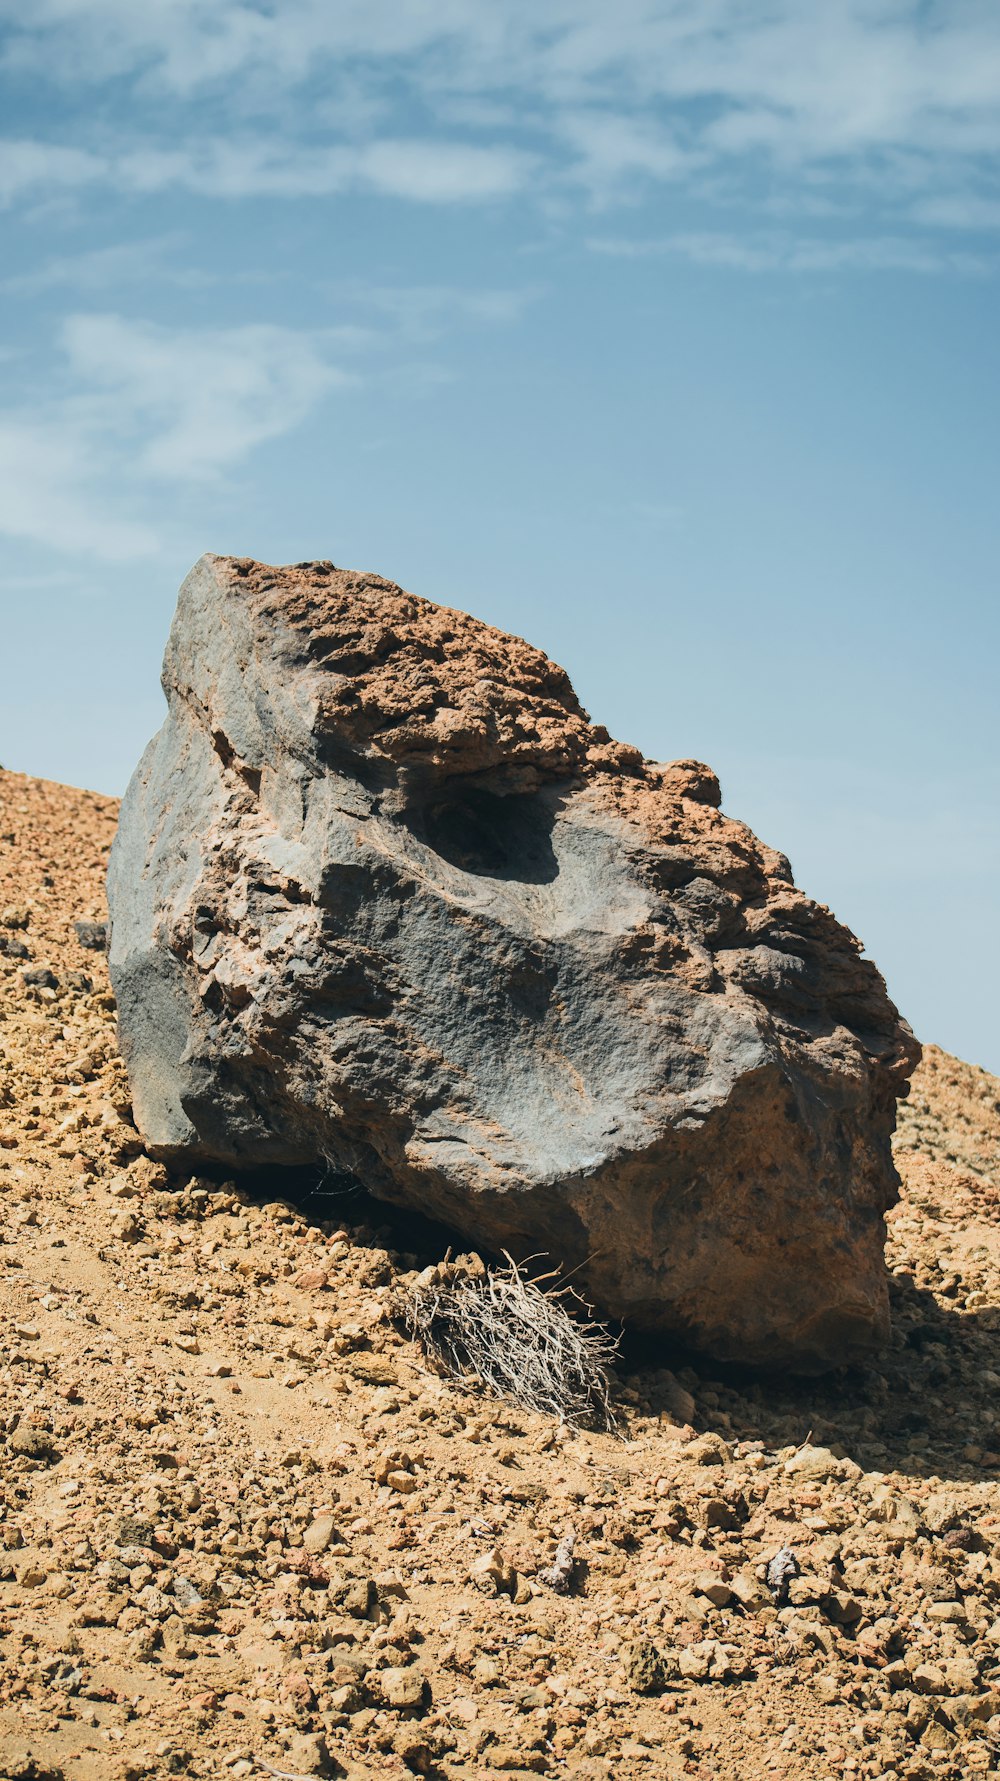 a large rock in the desert